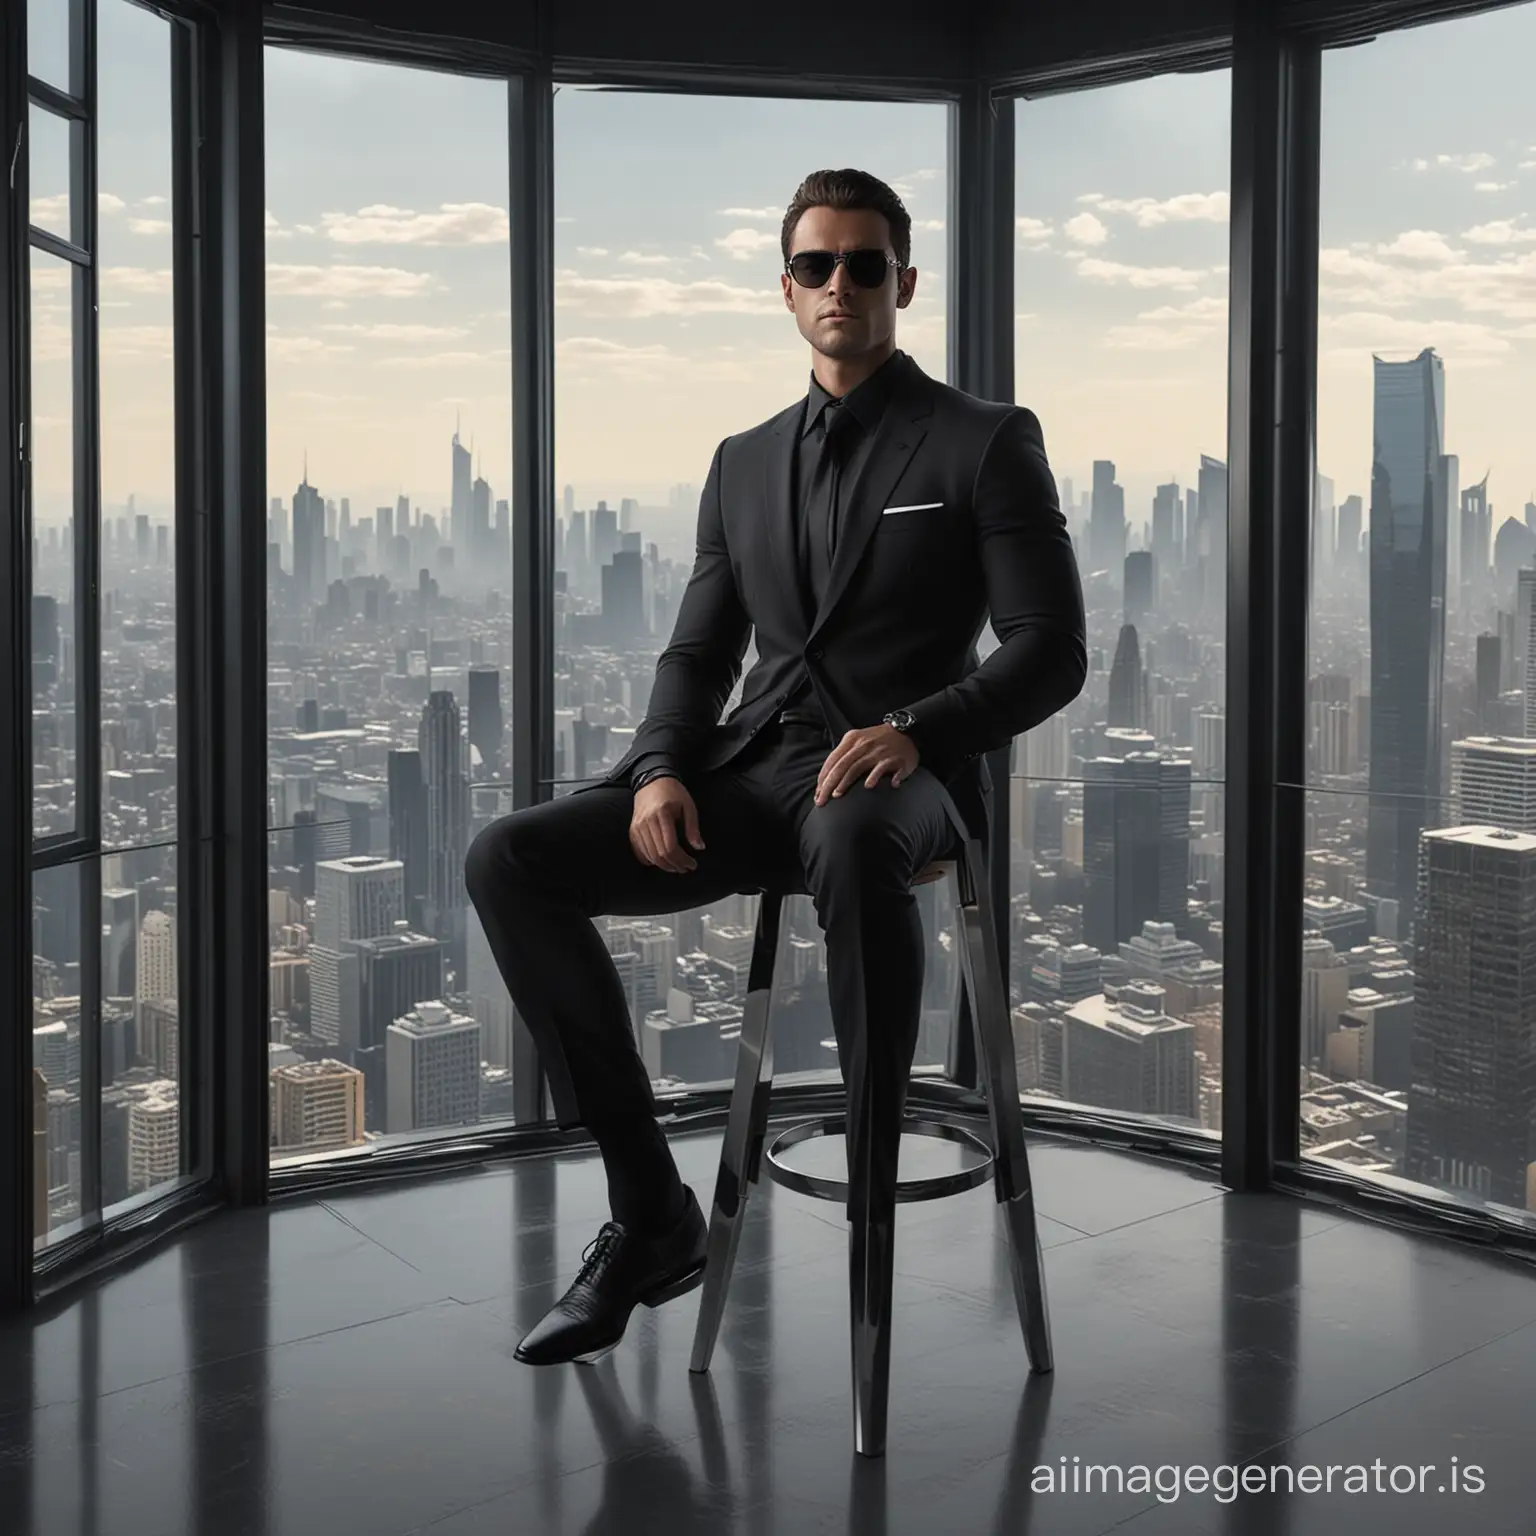 The avatar depicts a stylishly dressed man in a black shirt and suit, with dark glasses, sitting on a high stool. He is in a loft-style room with panoramic windows, located in a skyscraper. The background of the room may be decorated in a modern minimalist style, with an emphasis on glass surfaces and metallic elements.